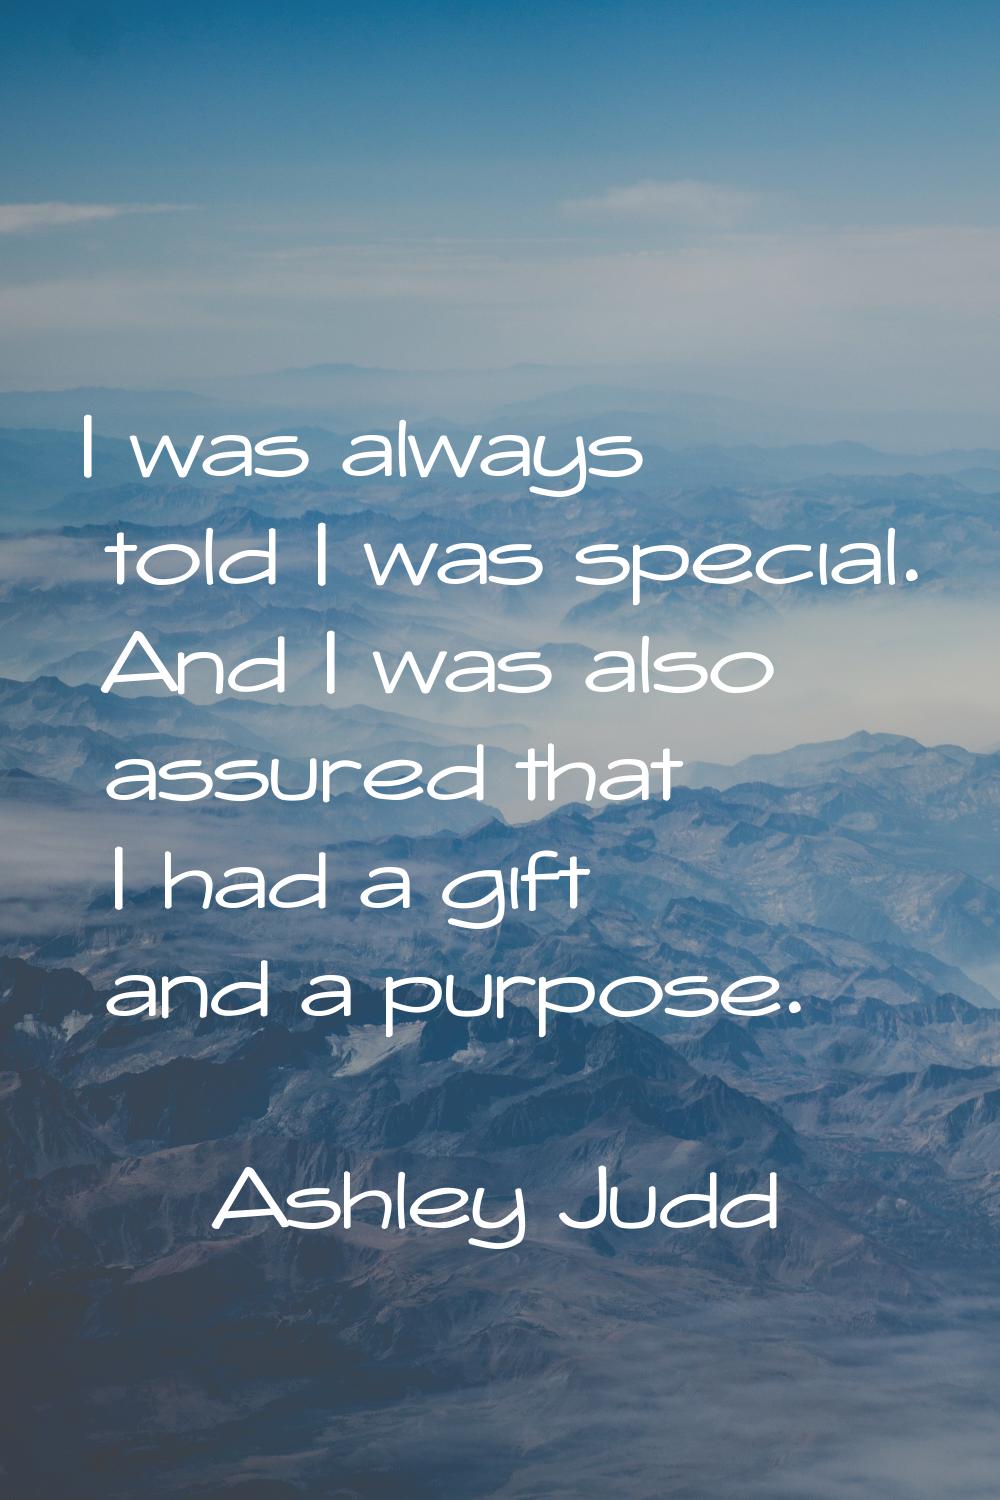 I was always told I was special. And I was also assured that I had a gift and a purpose.